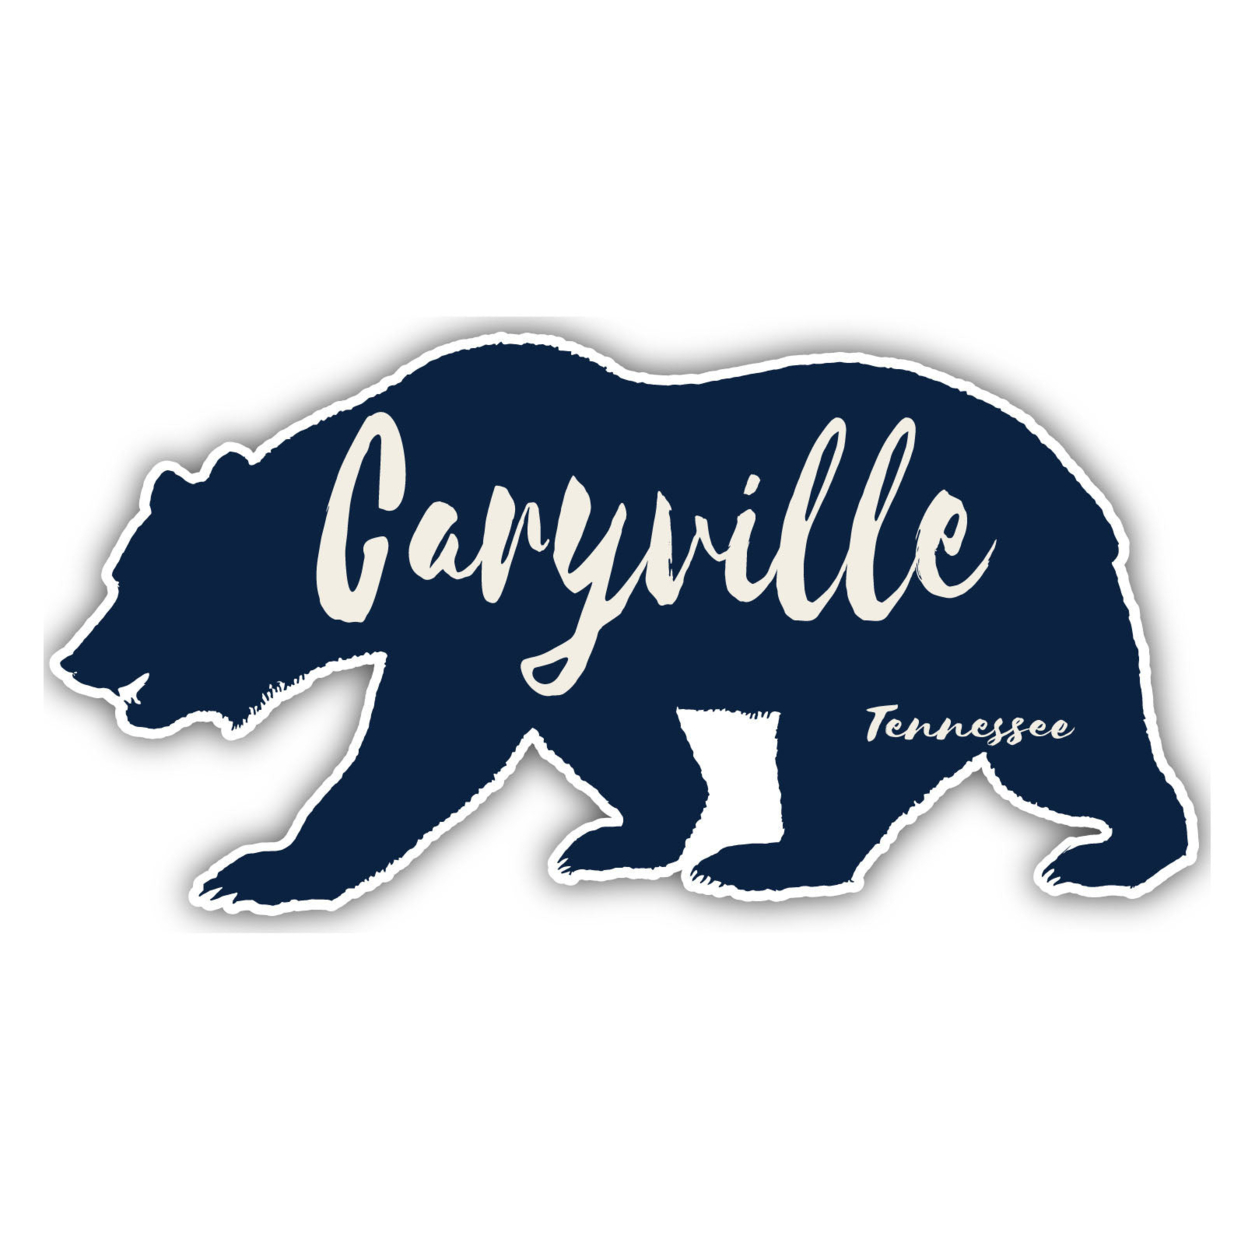 Caryville Tennessee Souvenir Decorative Stickers (Choose Theme And Size) - Single Unit, 10-Inch, Tent